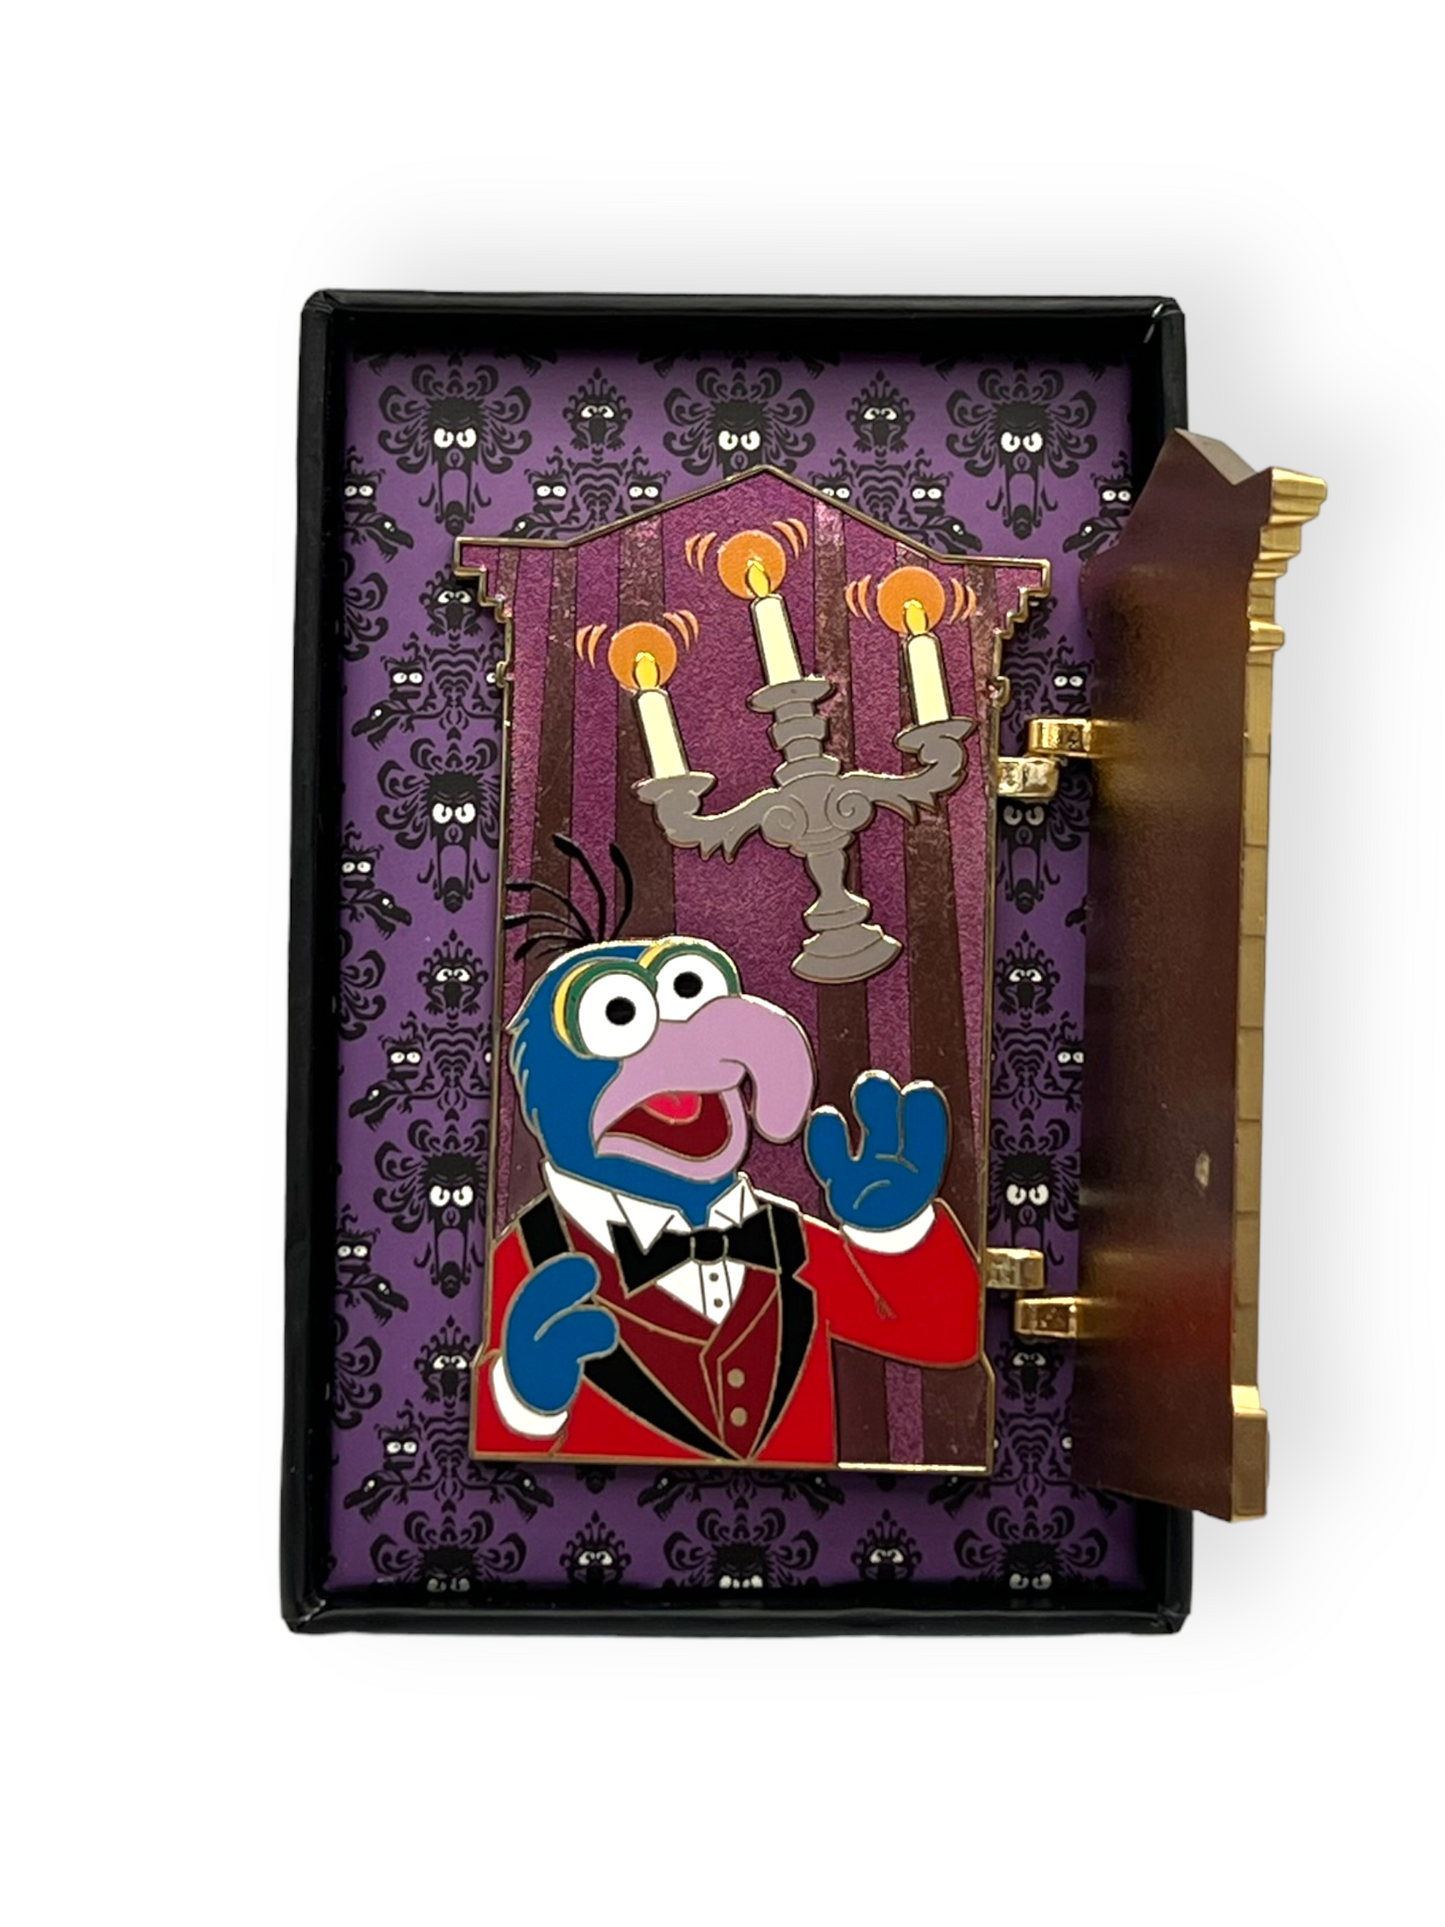 Muppets Haunted Mansion Door Gonzo Pin